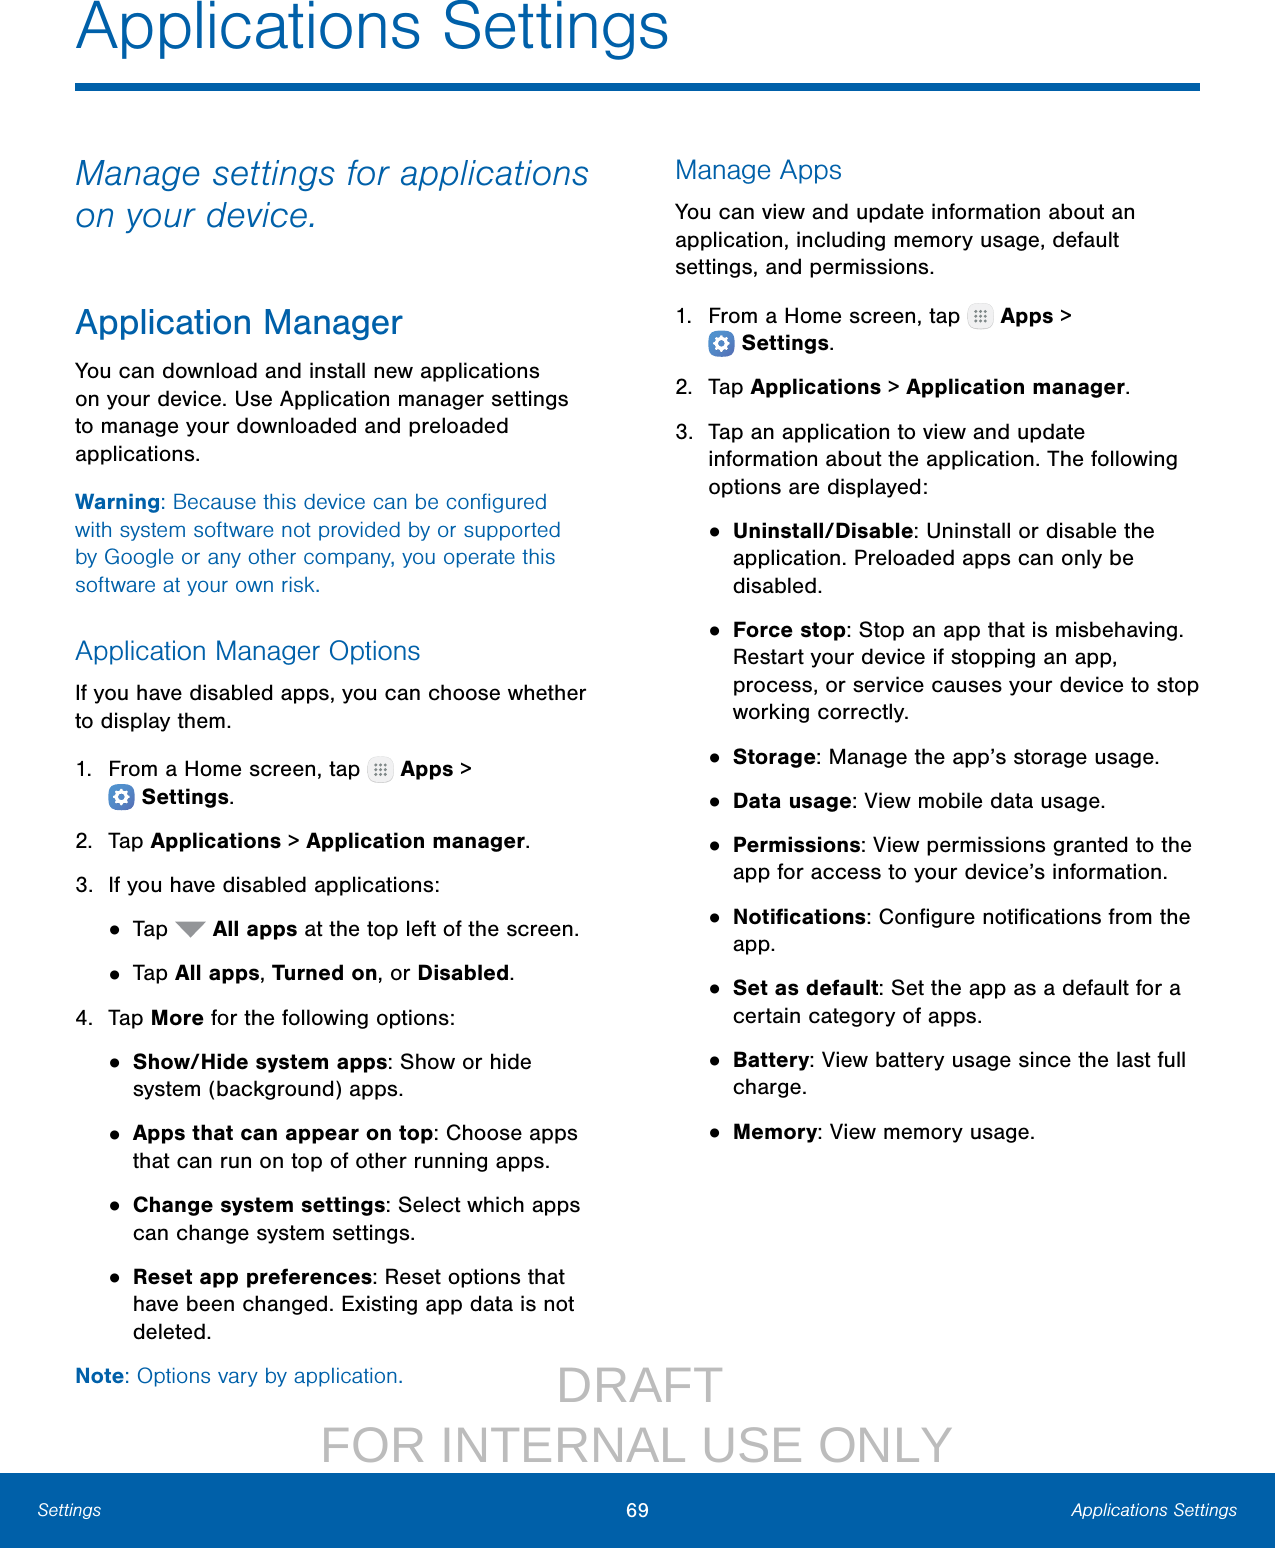                  DRAFT FOR INTERNAL USE ONLY69 Applications SettingsSettingsApplications SettingsManage settings for applications on your device.Application ManagerYou can download and install new applications on your device. Use Application manager settings to manage your downloaded and preloaded applications.Warning: Because this device can be conﬁgured with system software not provided by or supported by Google or any other company, you operate this software at your own risk.Application Manager OptionsIf you have disabled apps, you can choose whether to display them.1.  From a Home screen, tap   Apps &gt; Settings.2.  Tap Applications &gt; Applicationmanager.3.  If you have disabled applications:• Tap   All apps at the top left of the screen.• Tap All apps, Turned on, or Disabled.4.  Tap More for the following options:• Show/Hide system apps: Show or hide system (background) apps.• Apps that can appear on top: Choose apps that can run on top of other running apps.• Change system settings: Select which apps can change system settings.• Reset app preferences: Reset options that have been changed. Existing app data is not deleted.Note: Options vary by application.Manage AppsYou can view and update information about an application, including memory usage, default settings, and permissions.1.  From a Home screen, tap   Apps &gt; Settings.2.  Tap Applications &gt; Applicationmanager.3.  Tap an application to view and update information about the application. The following options are displayed:• Uninstall/Disable: Uninstall or disable the application. Preloaded apps can only be disabled.• Force stop: Stop an app that is misbehaving. Restart your device if stopping an app, process, or service causes your device to stop working correctly.• Storage: Manage the app’s storage usage.• Data usage: View mobile data usage.• Permissions: View permissions granted to the app for access to your device’s information.• Notiﬁcations: Conﬁgure notiﬁcations from the app.• Set as default: Set the app as a default for a certain category of apps.• Battery: View battery usage since the last full charge.• Memory: View memory usage.